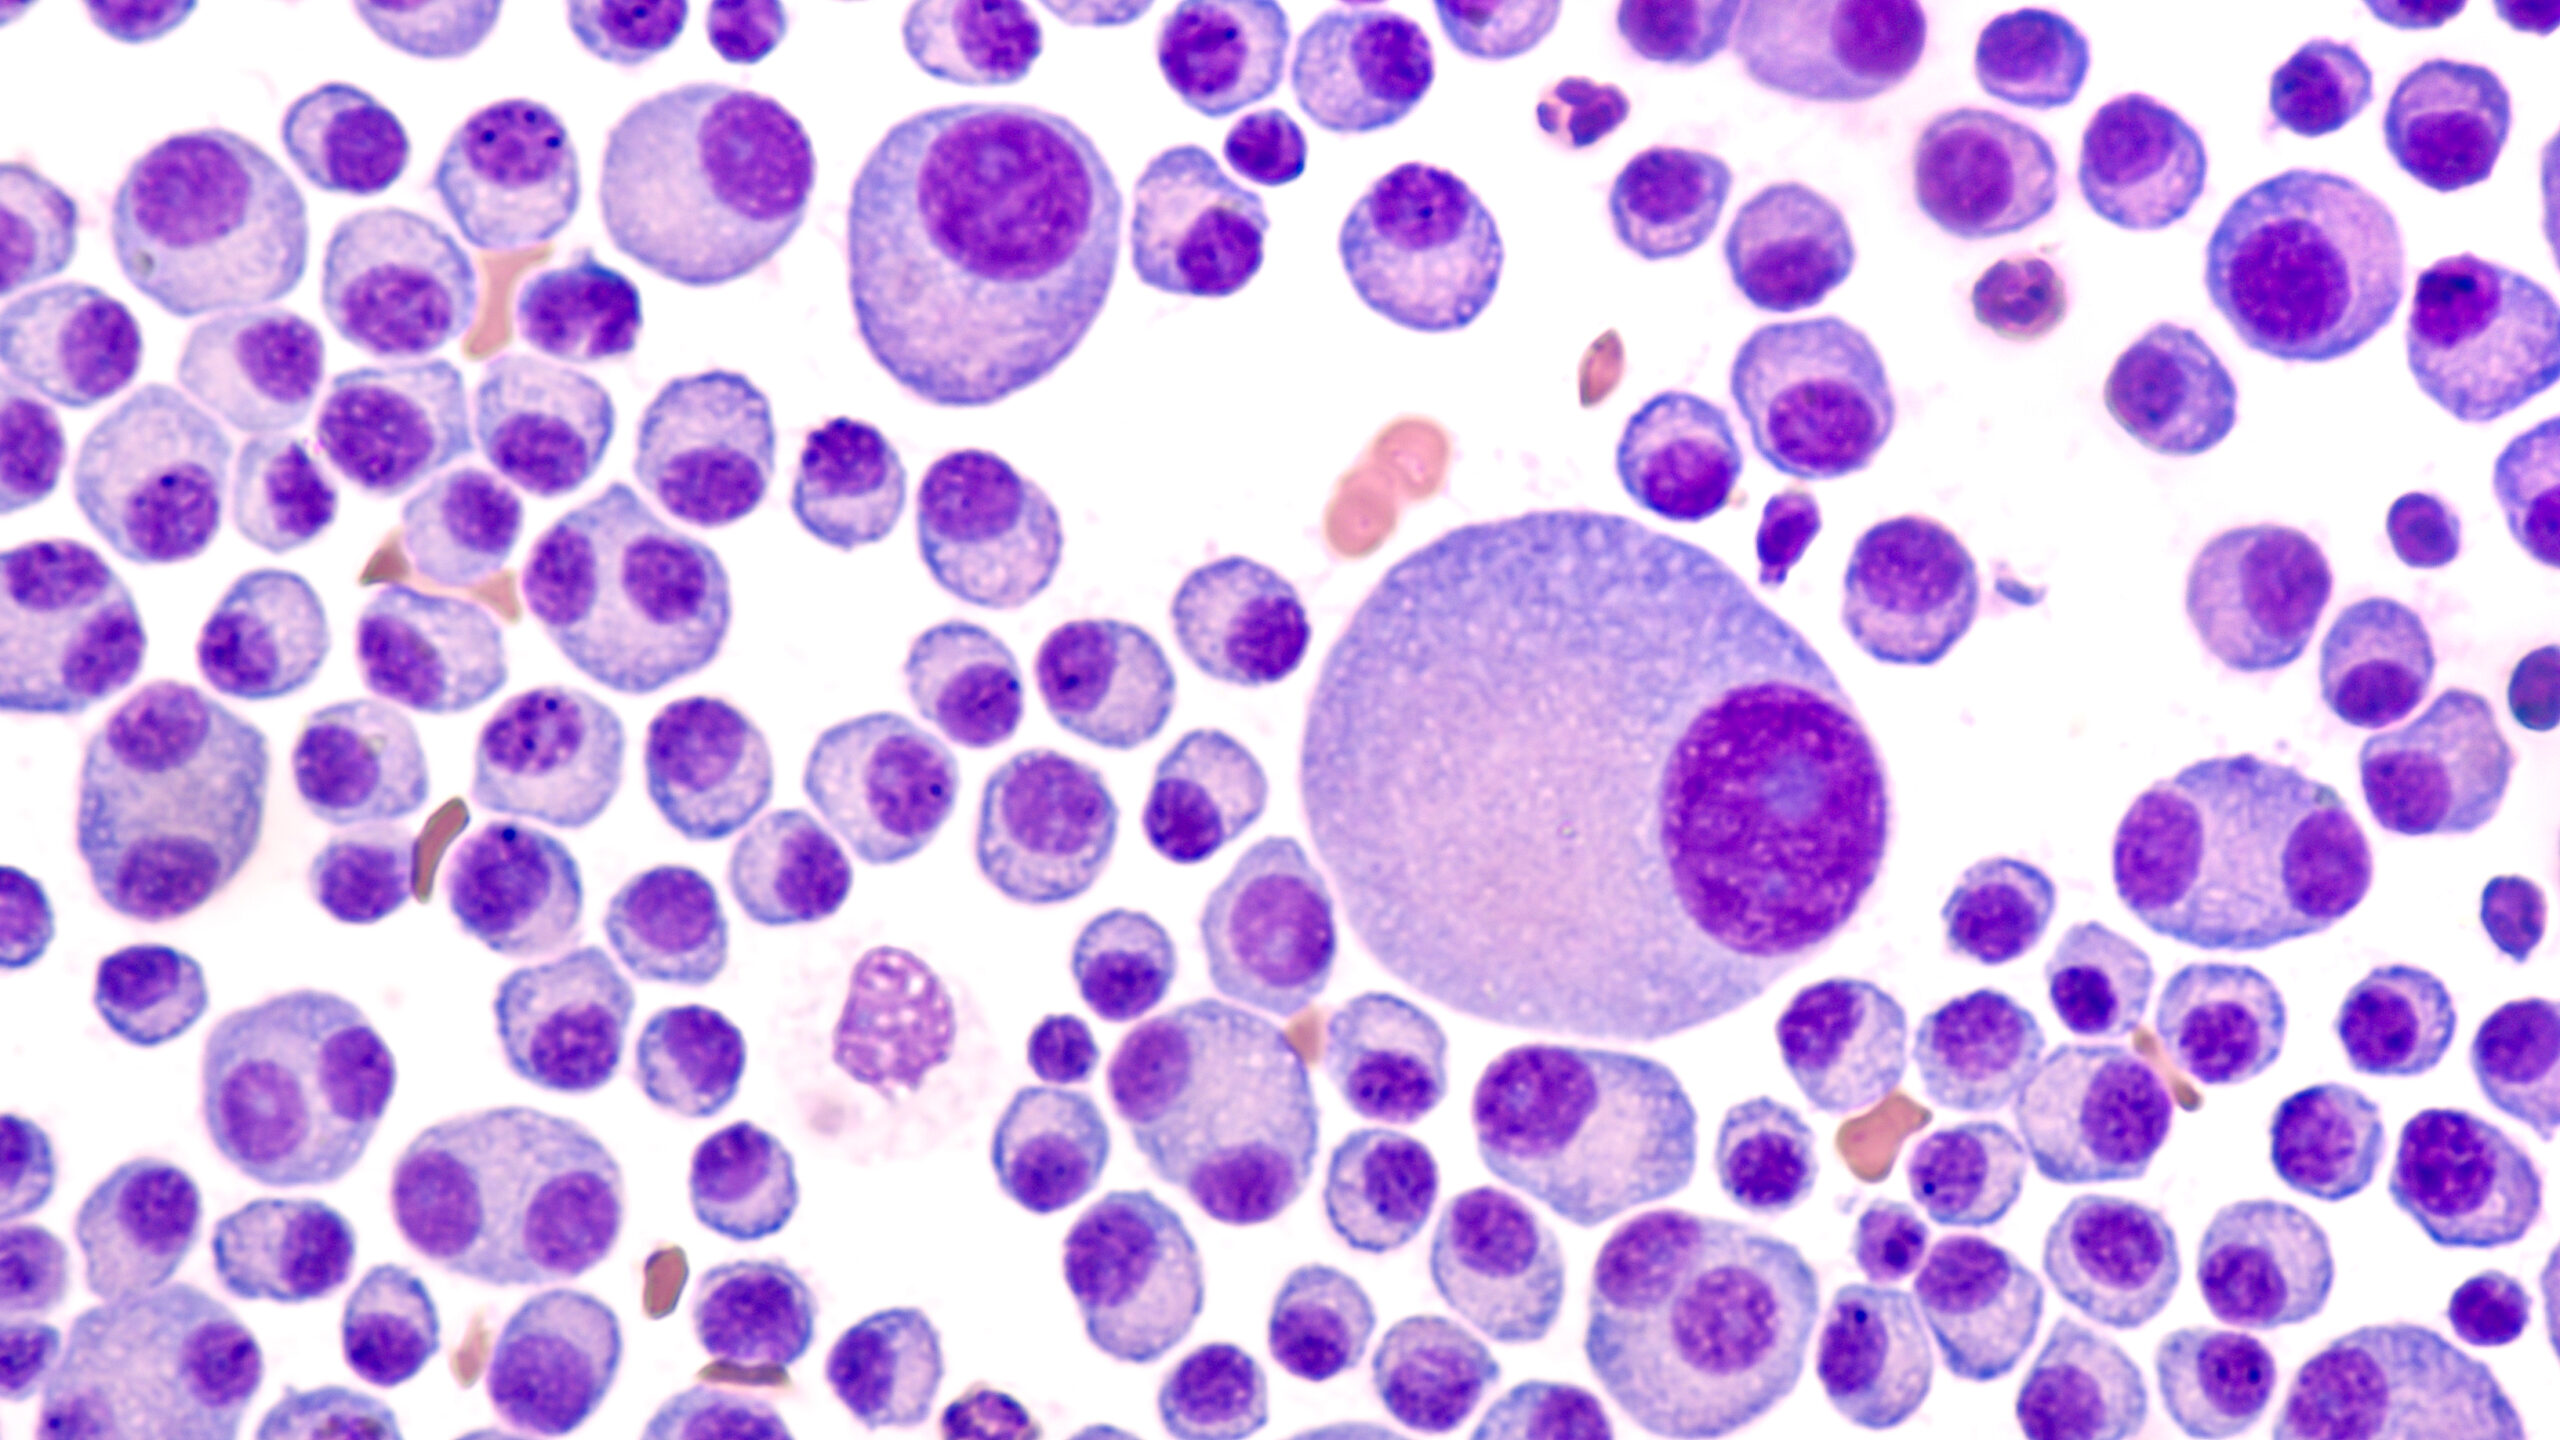 A close up of the blood cells in purple